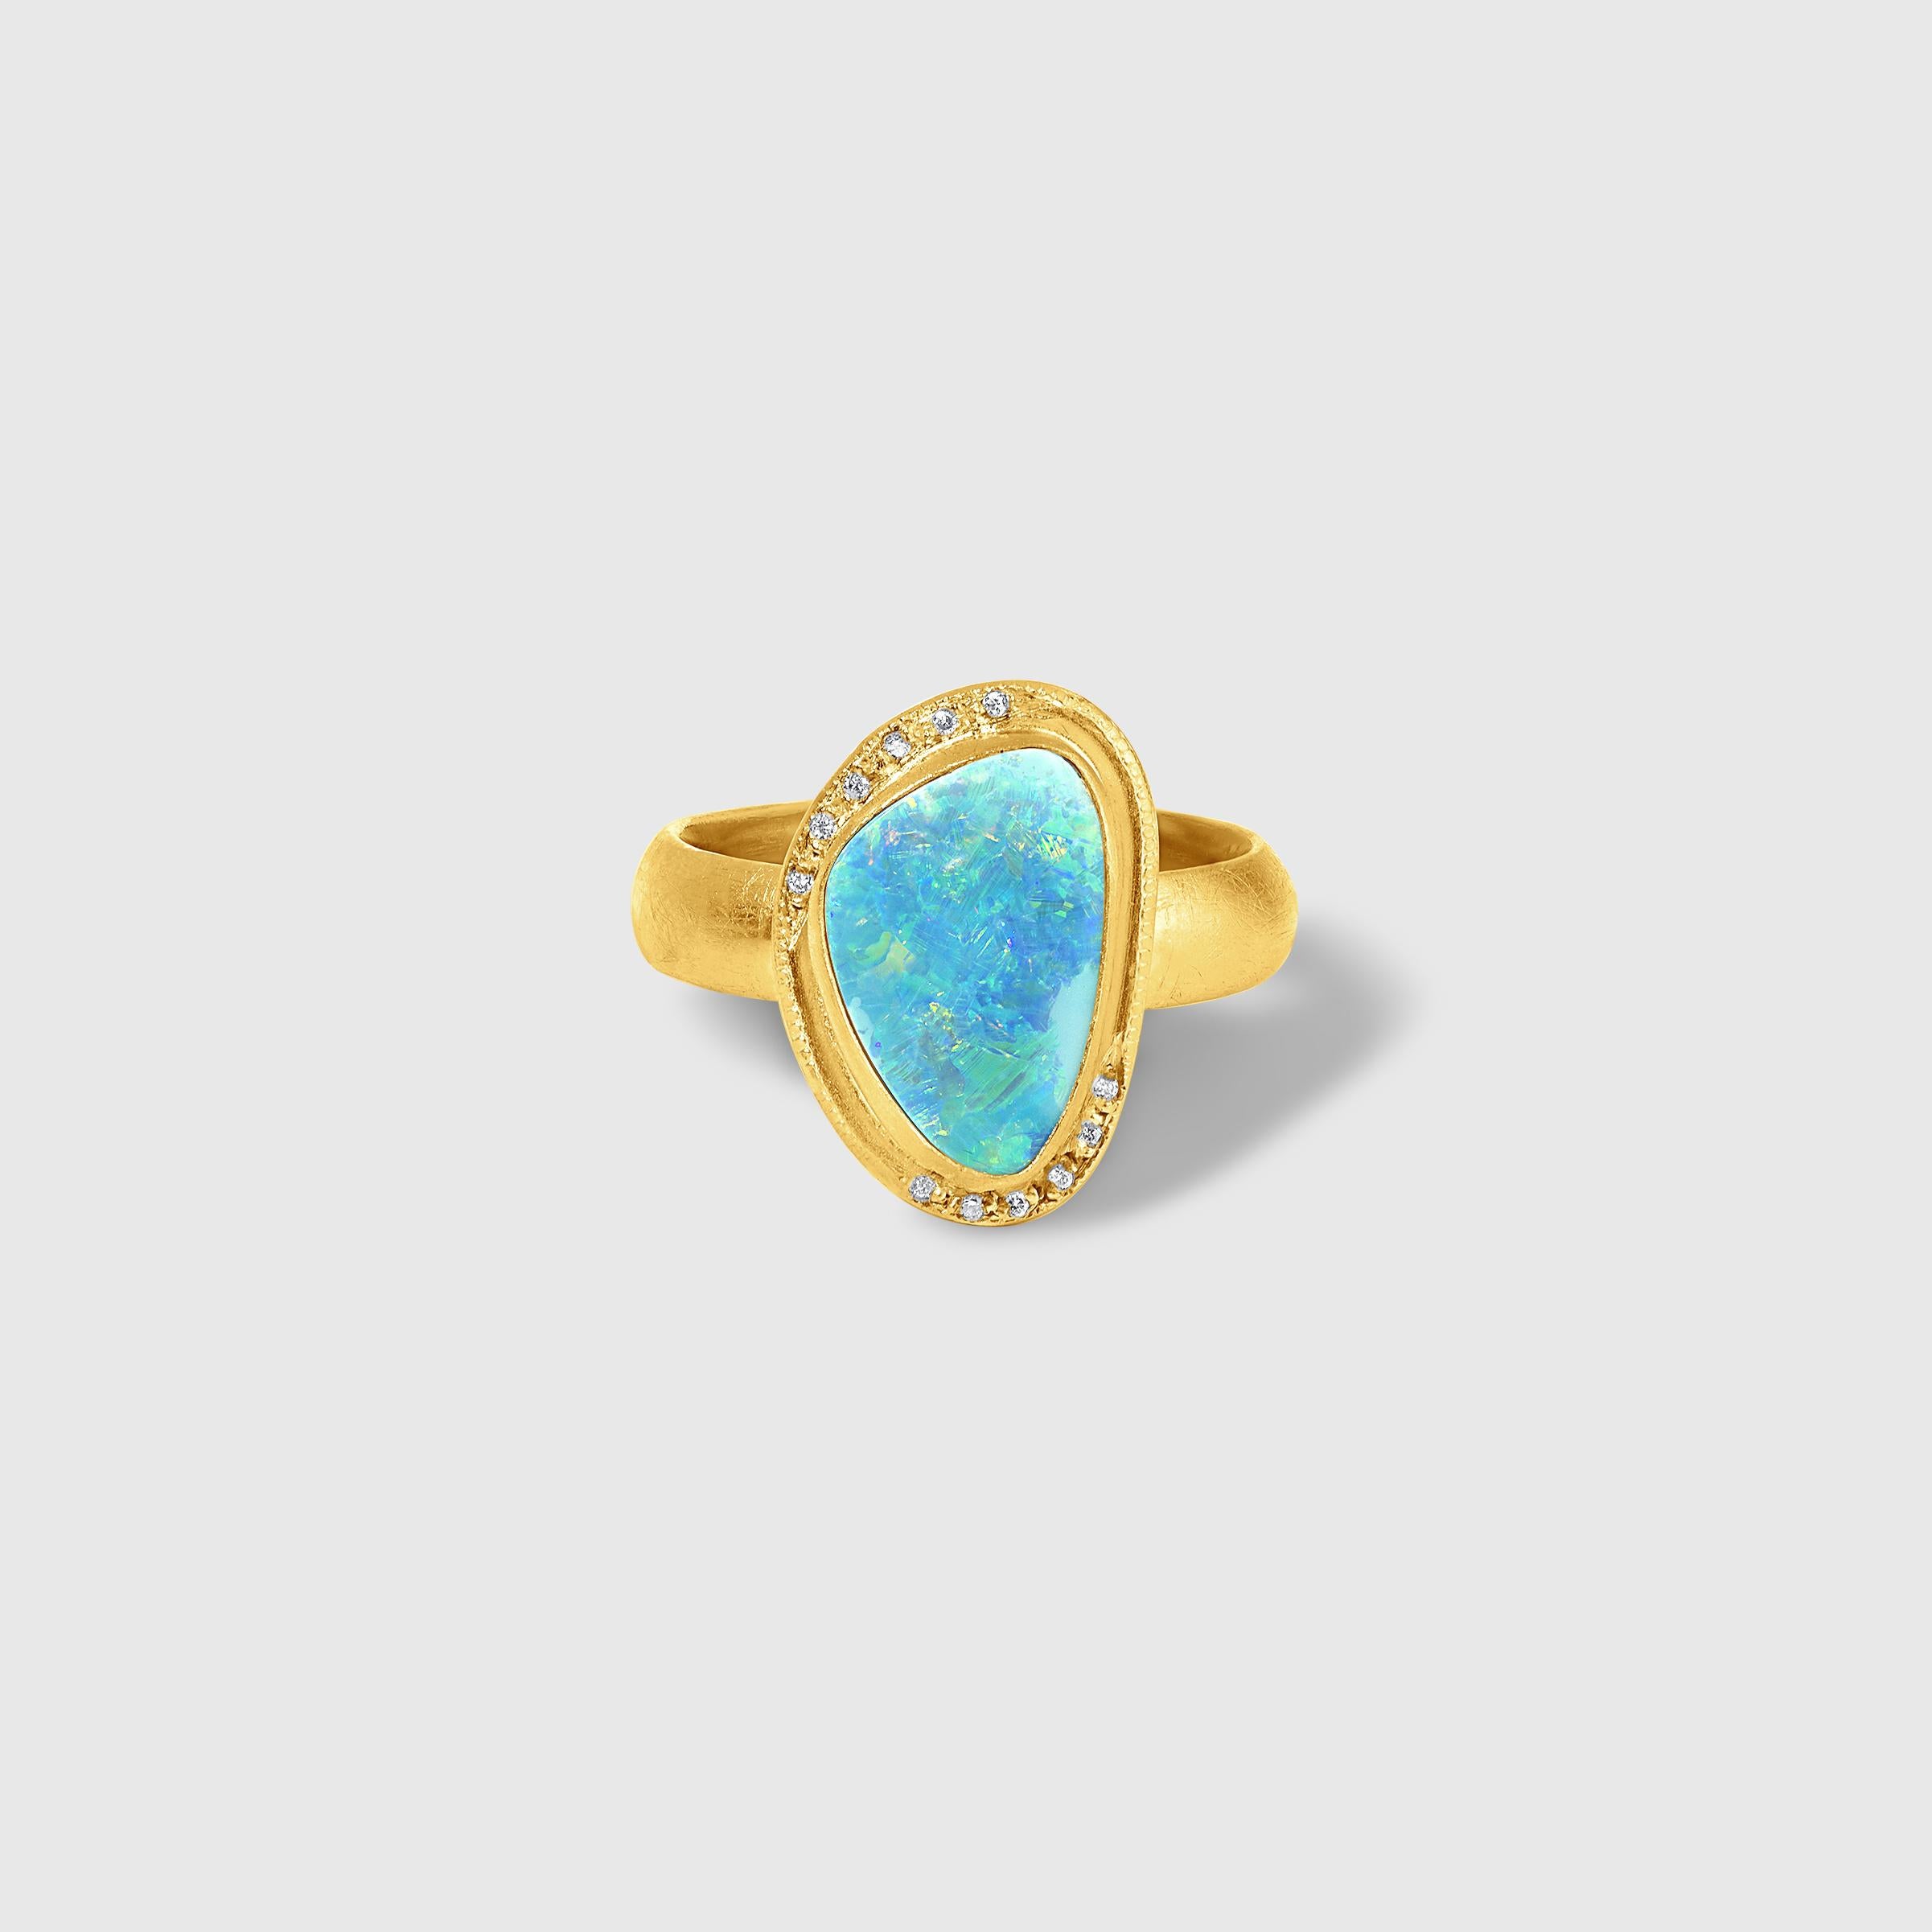 Hanedan Ring With Opal and Diamonds, 24kt Gold and Silver, Kurtulan 24kt gold-fused on sterling silver. Size 6 is in stock. Diamonds: 0.02ct. Opal: 2.5ct.  This ring is one of a kind. There is a small slit in the back on the bottom of the shank that